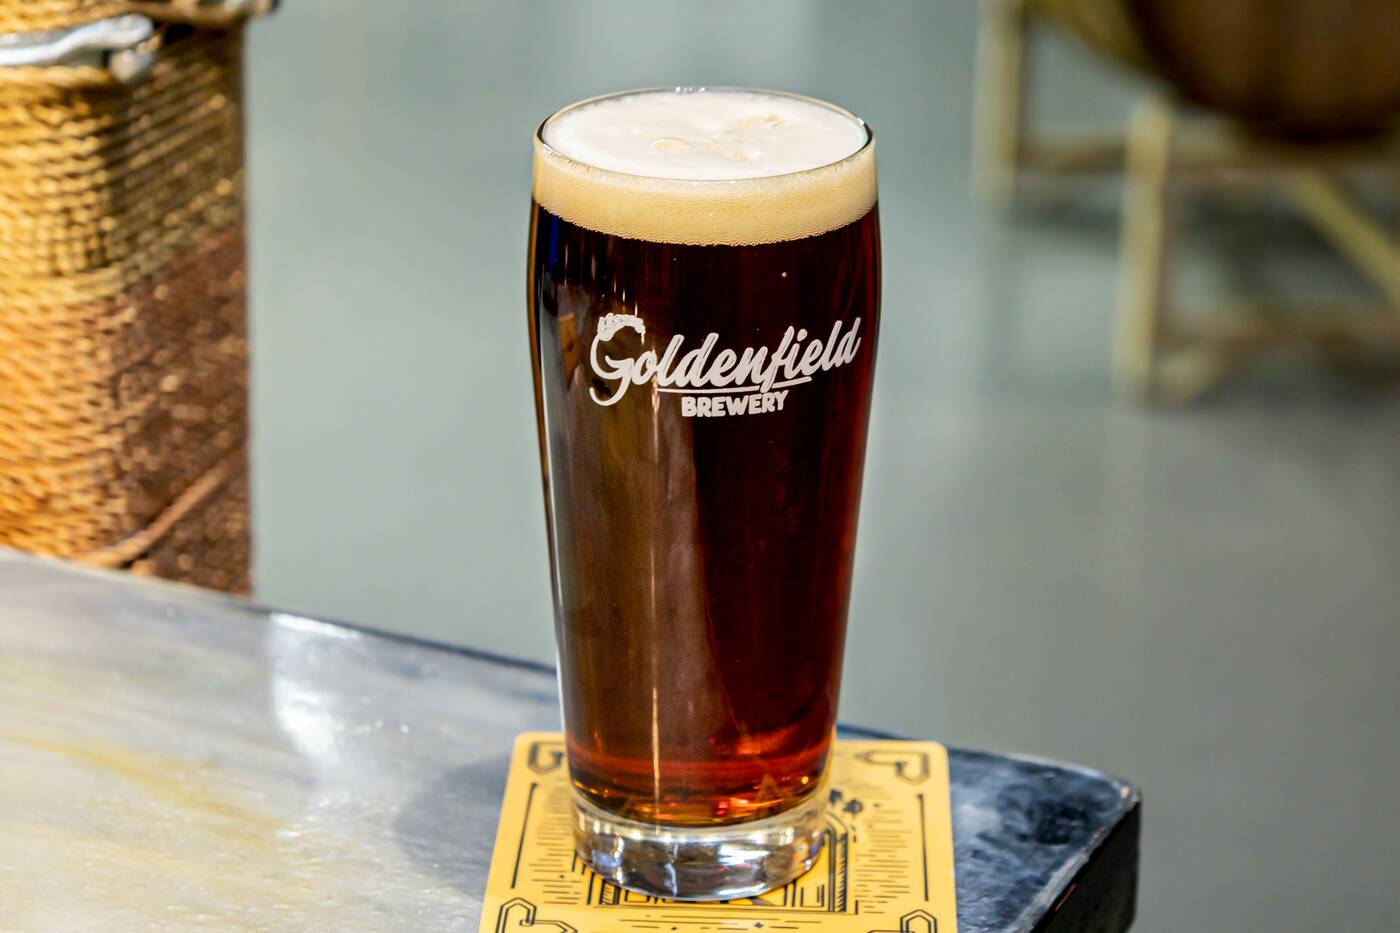 goldenfield brewery